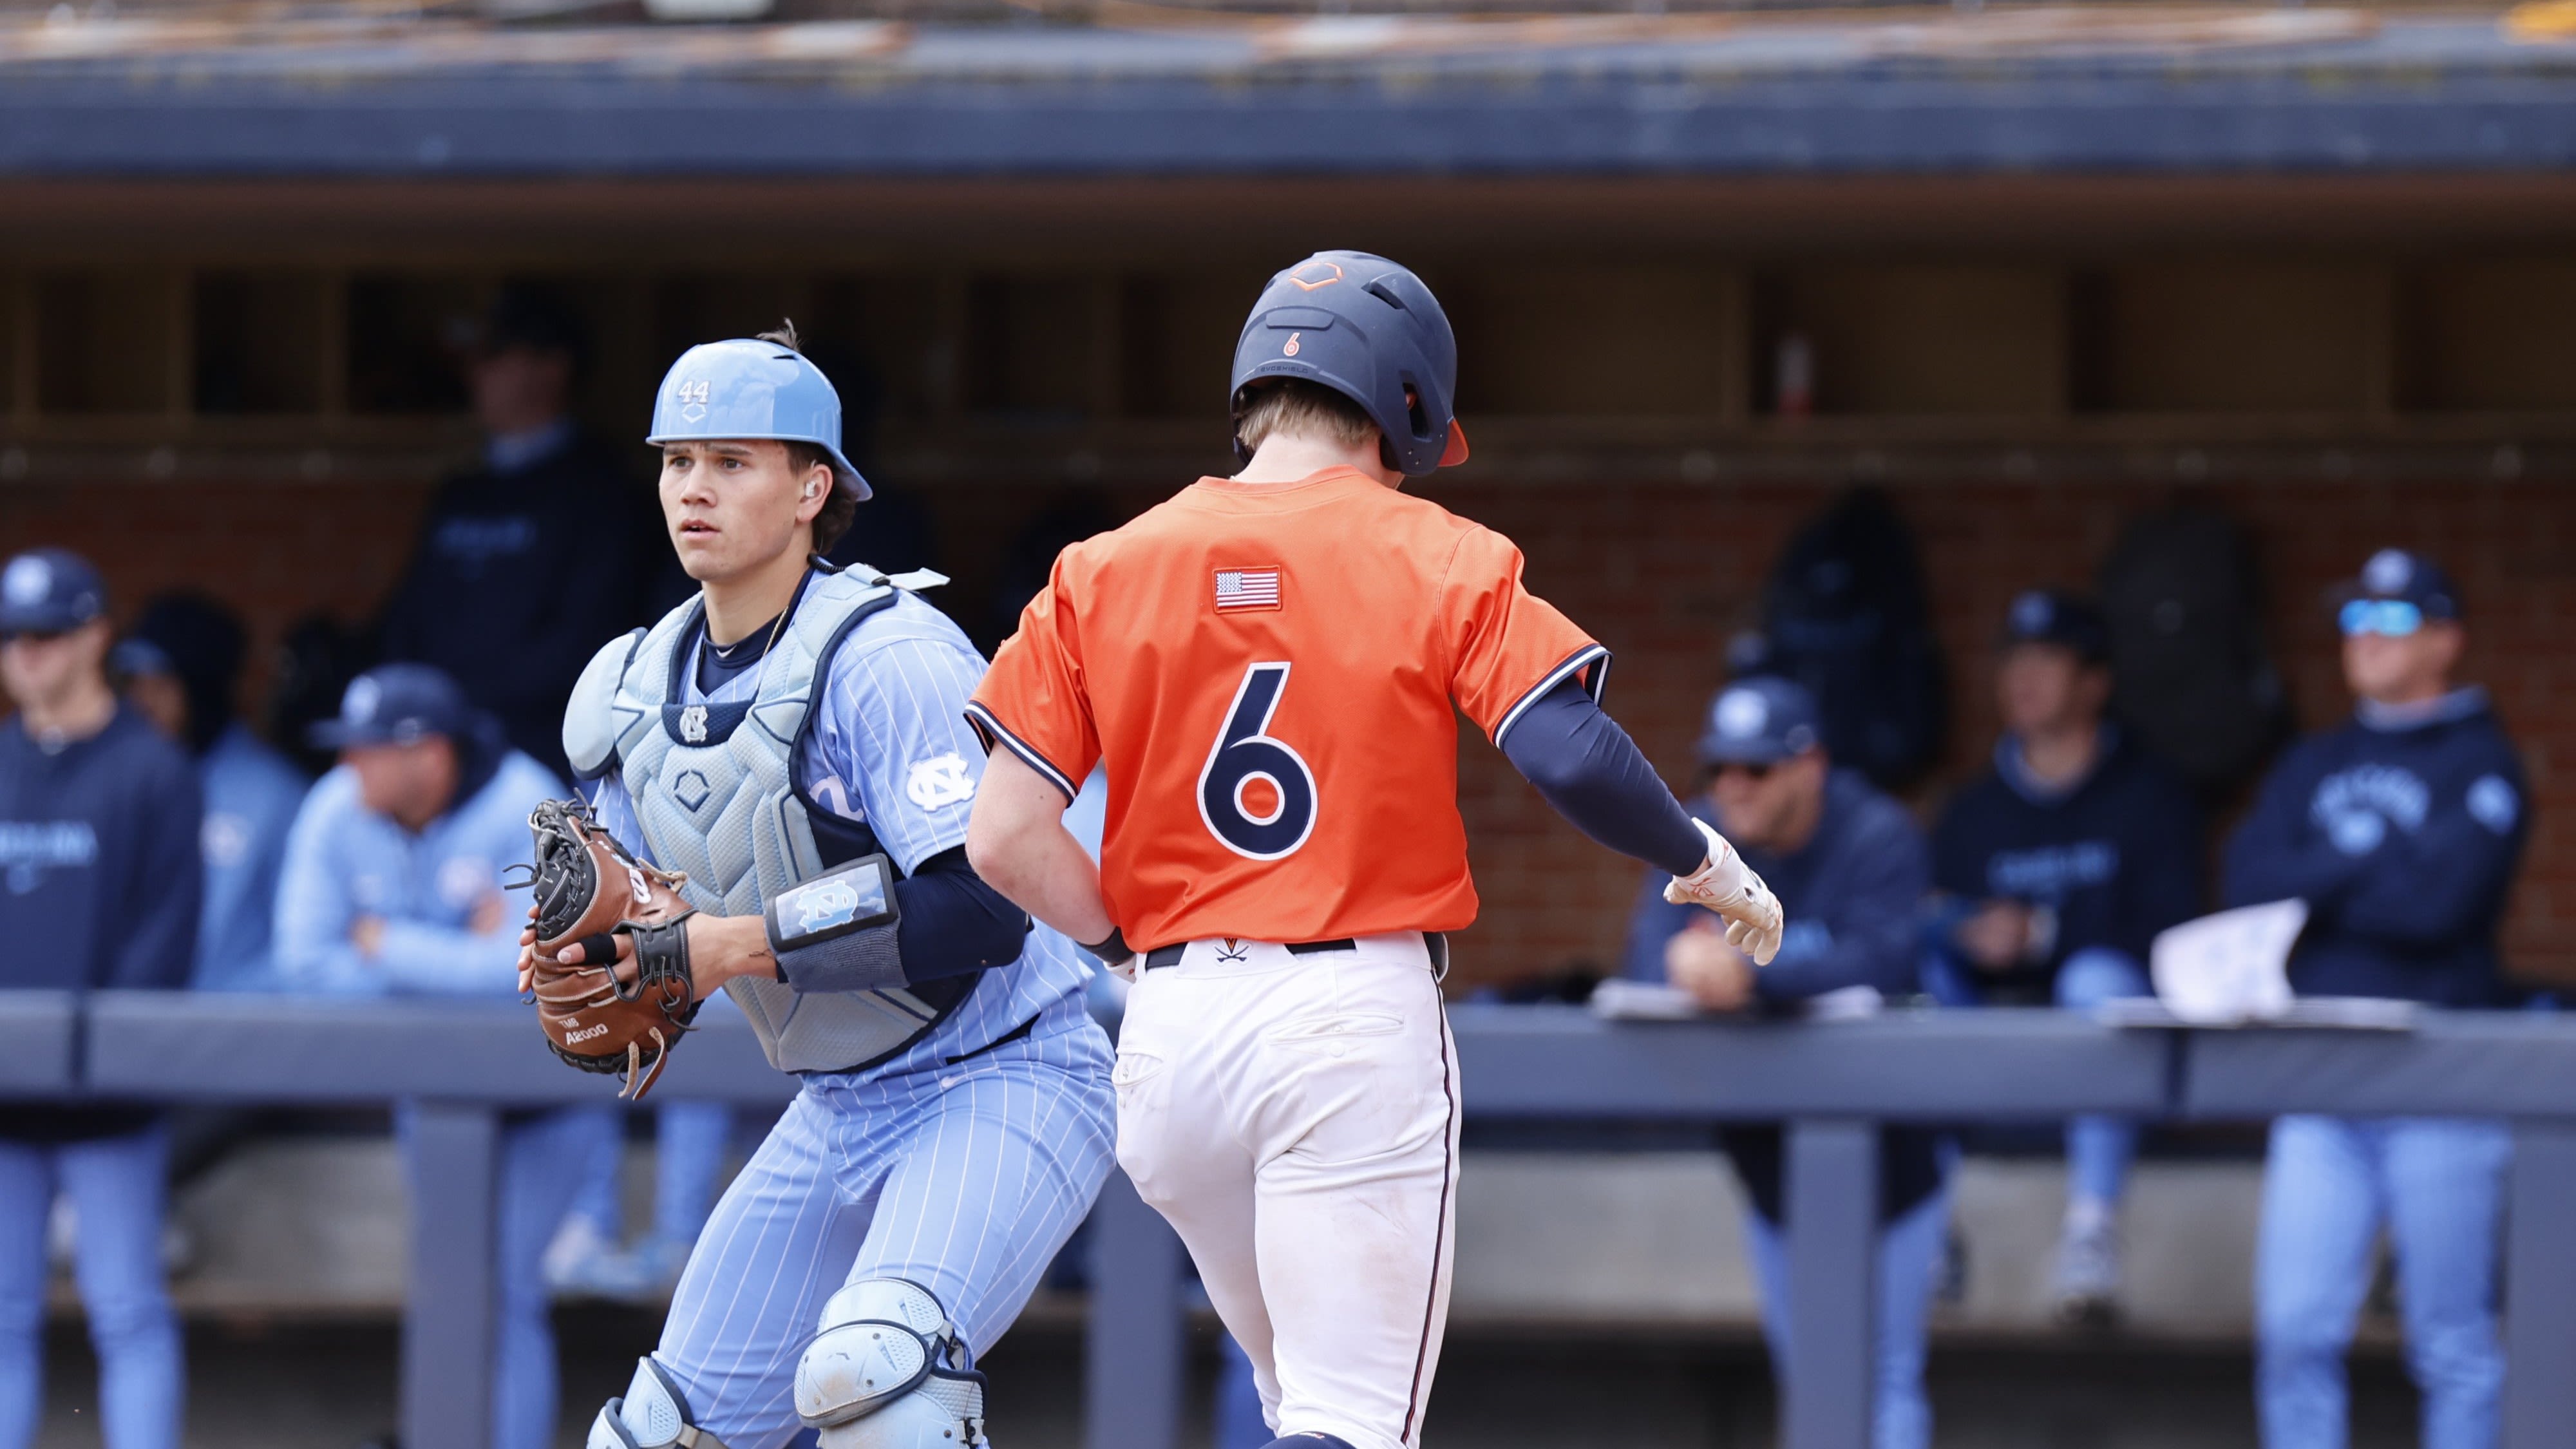 Griff O'Ferrall scores a run during the Virginia baseball game against North Carolina at Disharoon Park.